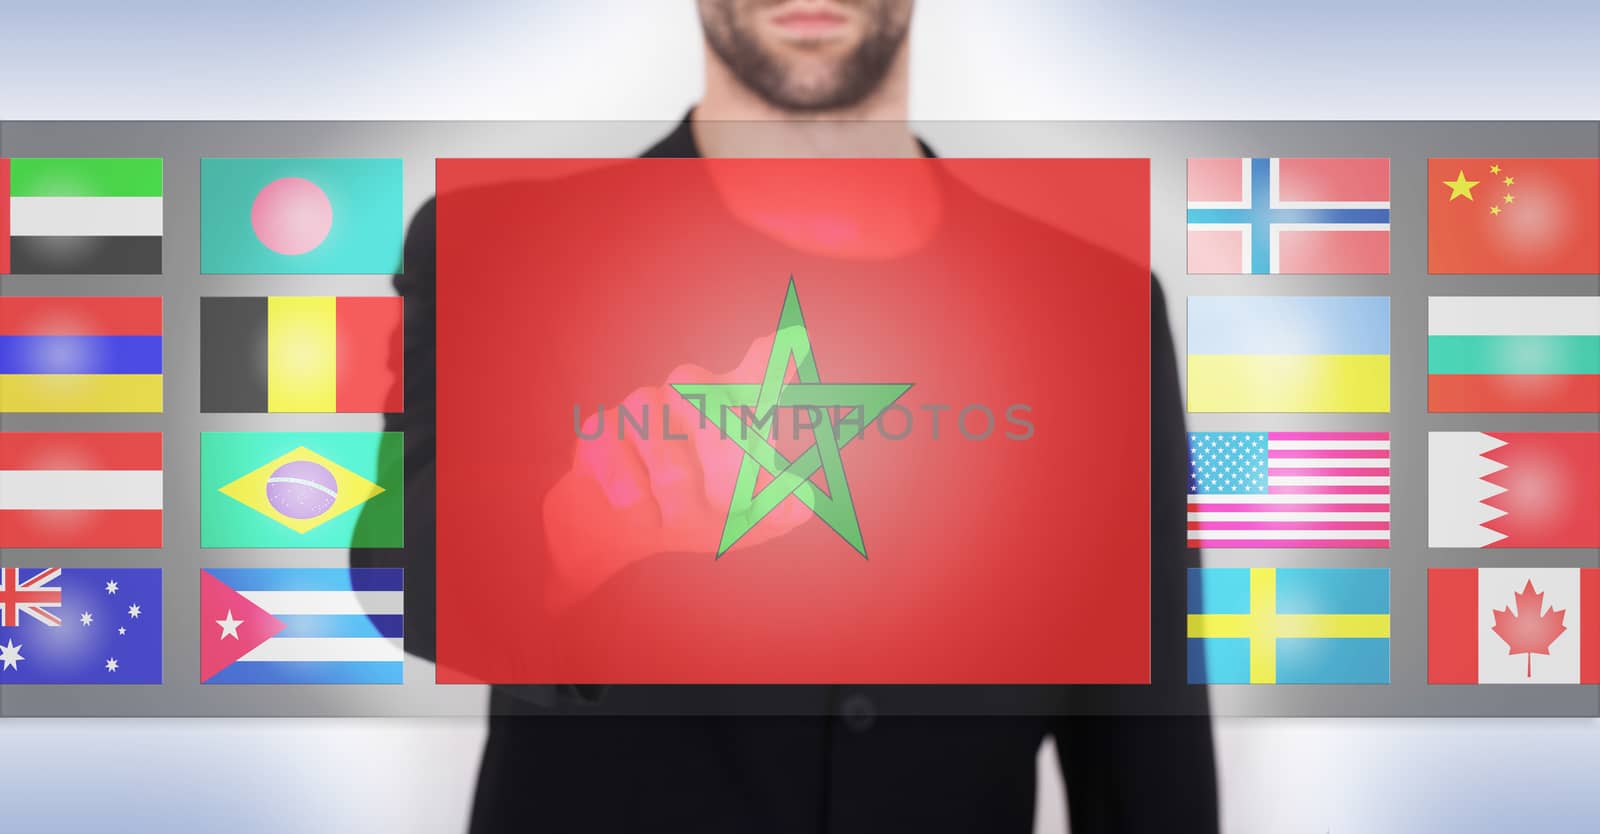 Hand pushing on a touch screen interface, choosing language or country, Morocco